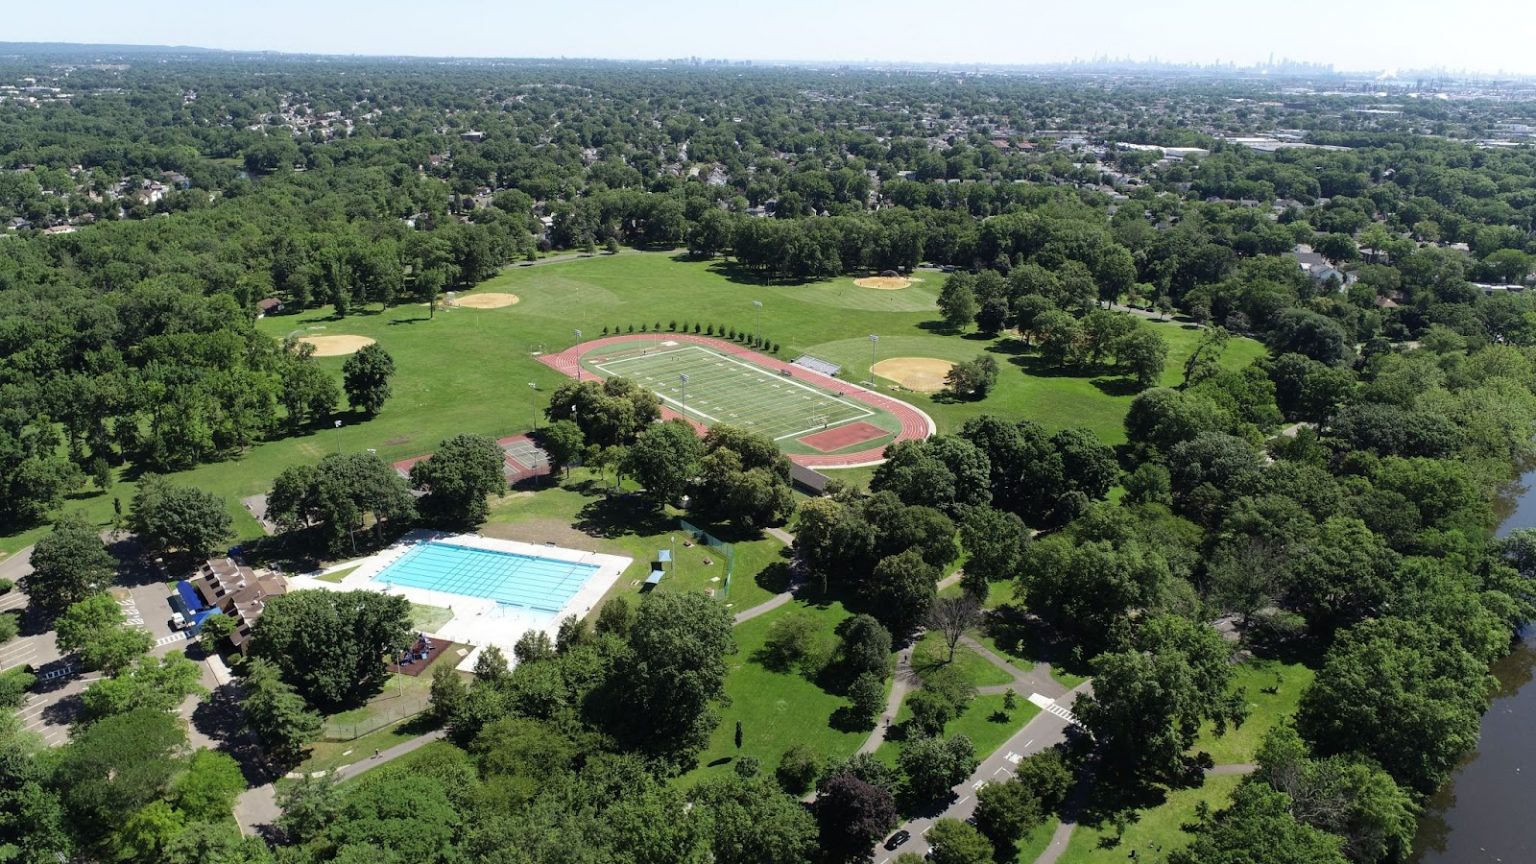 Historic View and Drone Photo of the Rahway River Park in Union County